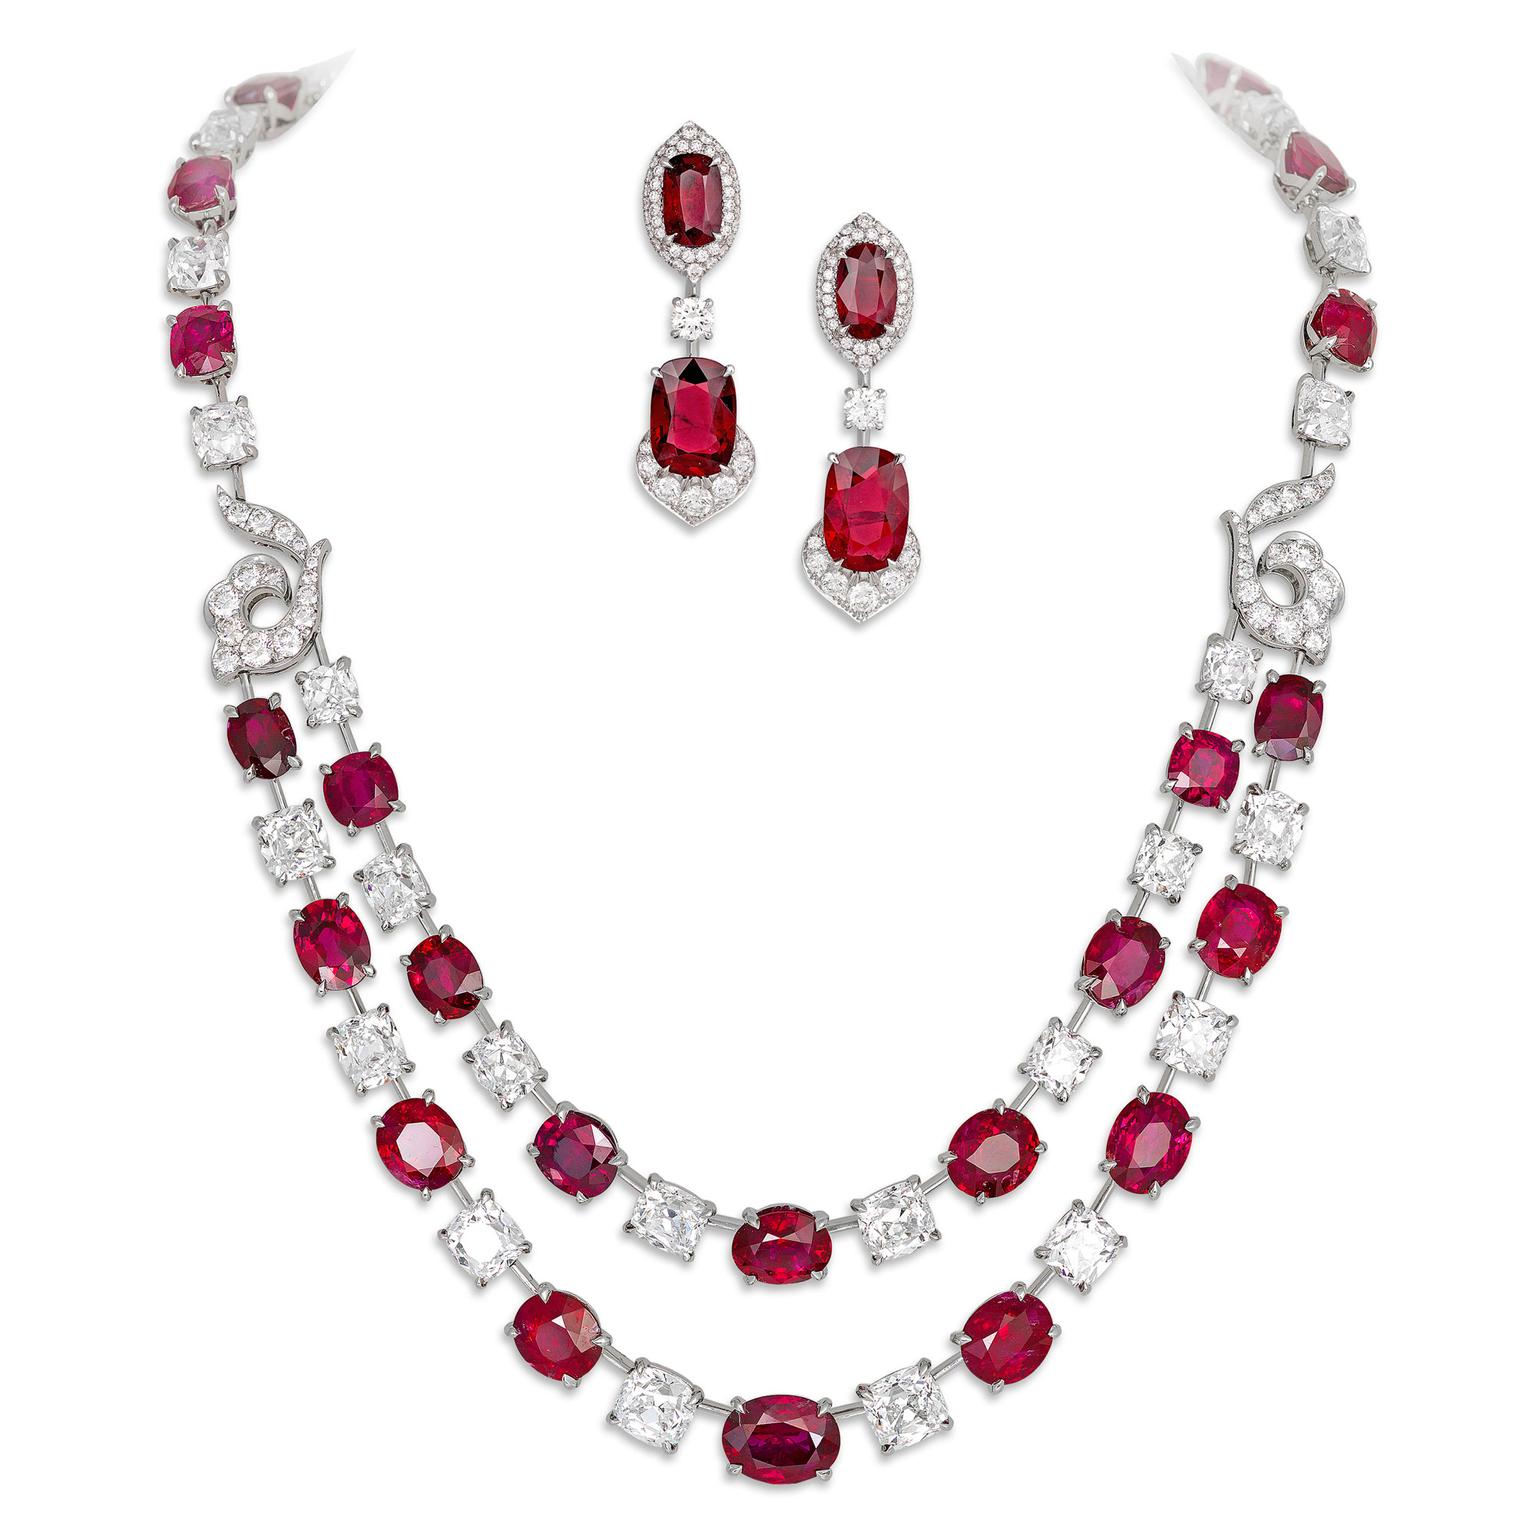 David Morris set comprised of ruby necklace and earrings